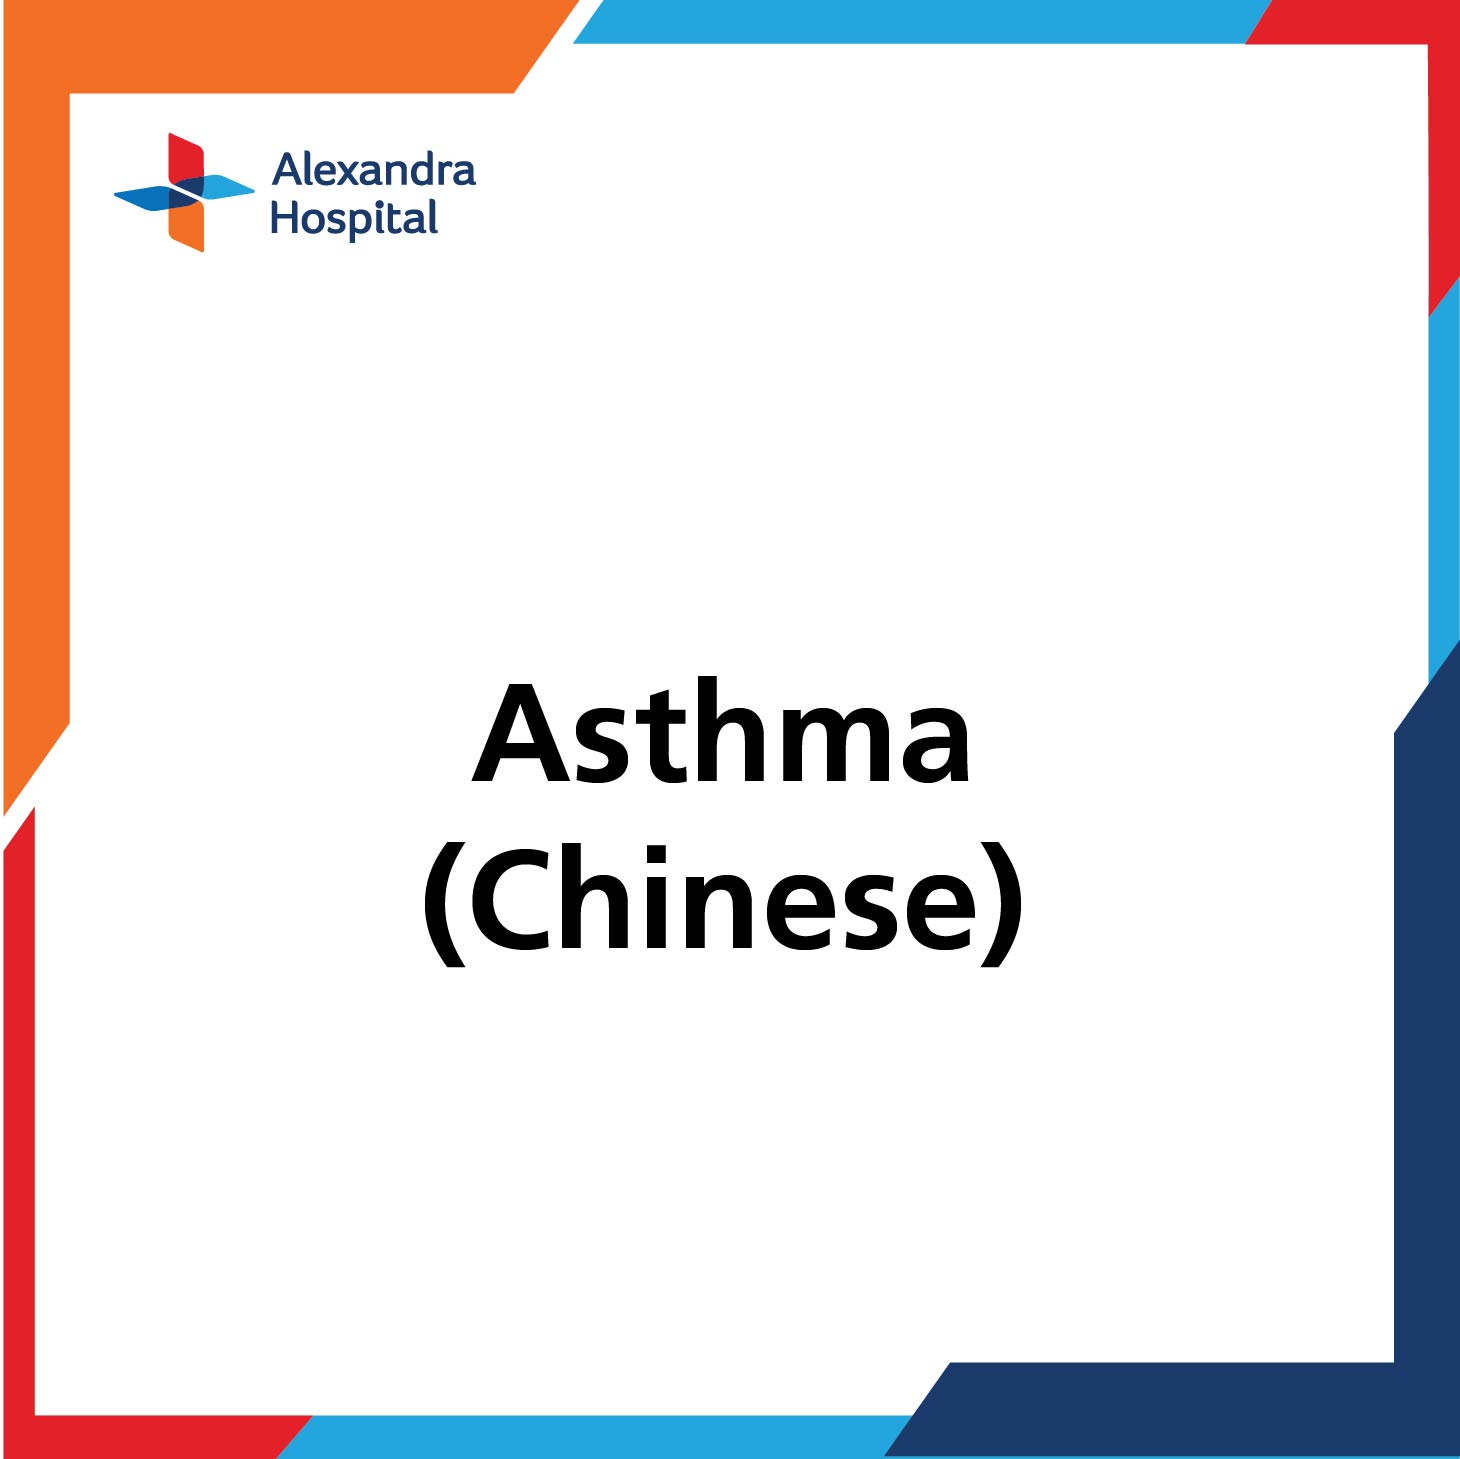 Asthma (Chinese)